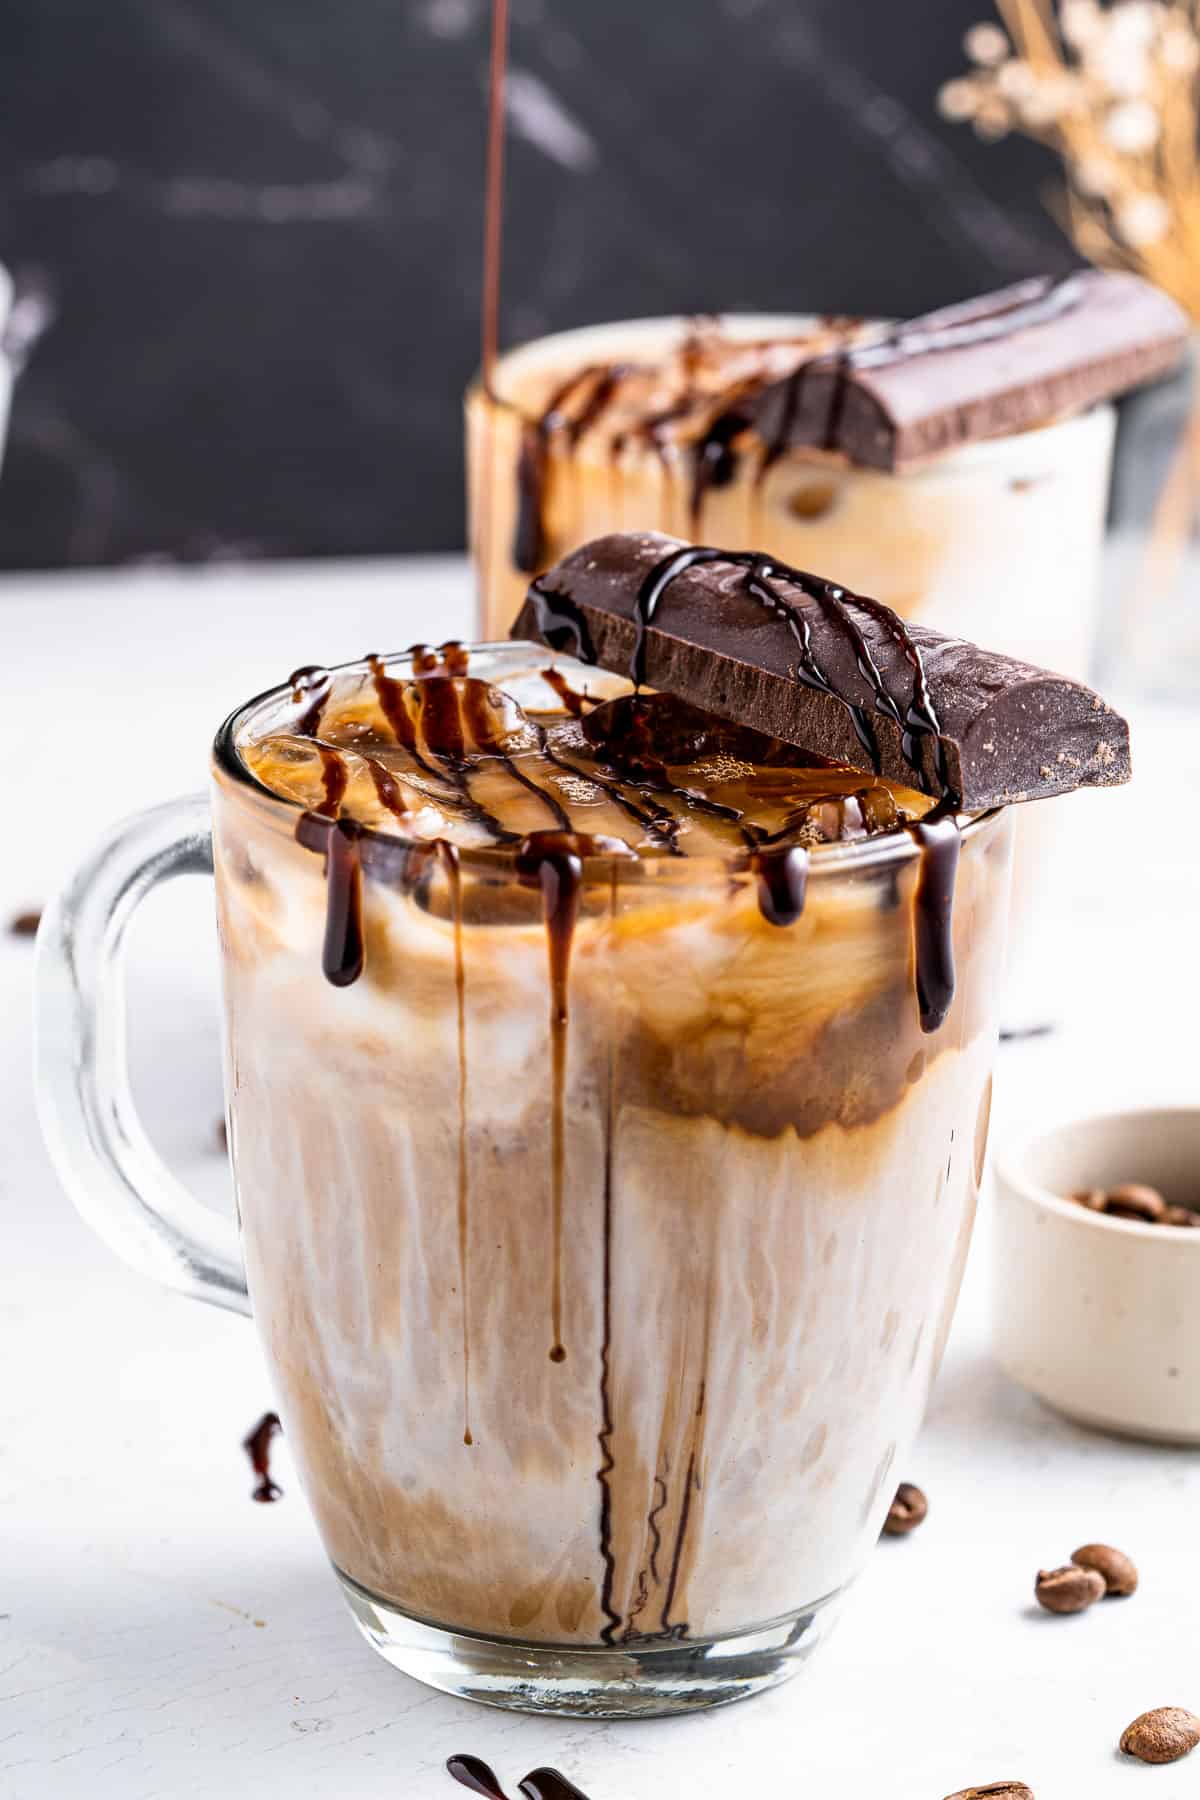 An iced mocha latte in a glass mug with a chocolate bar and chocolate drizzle on top.